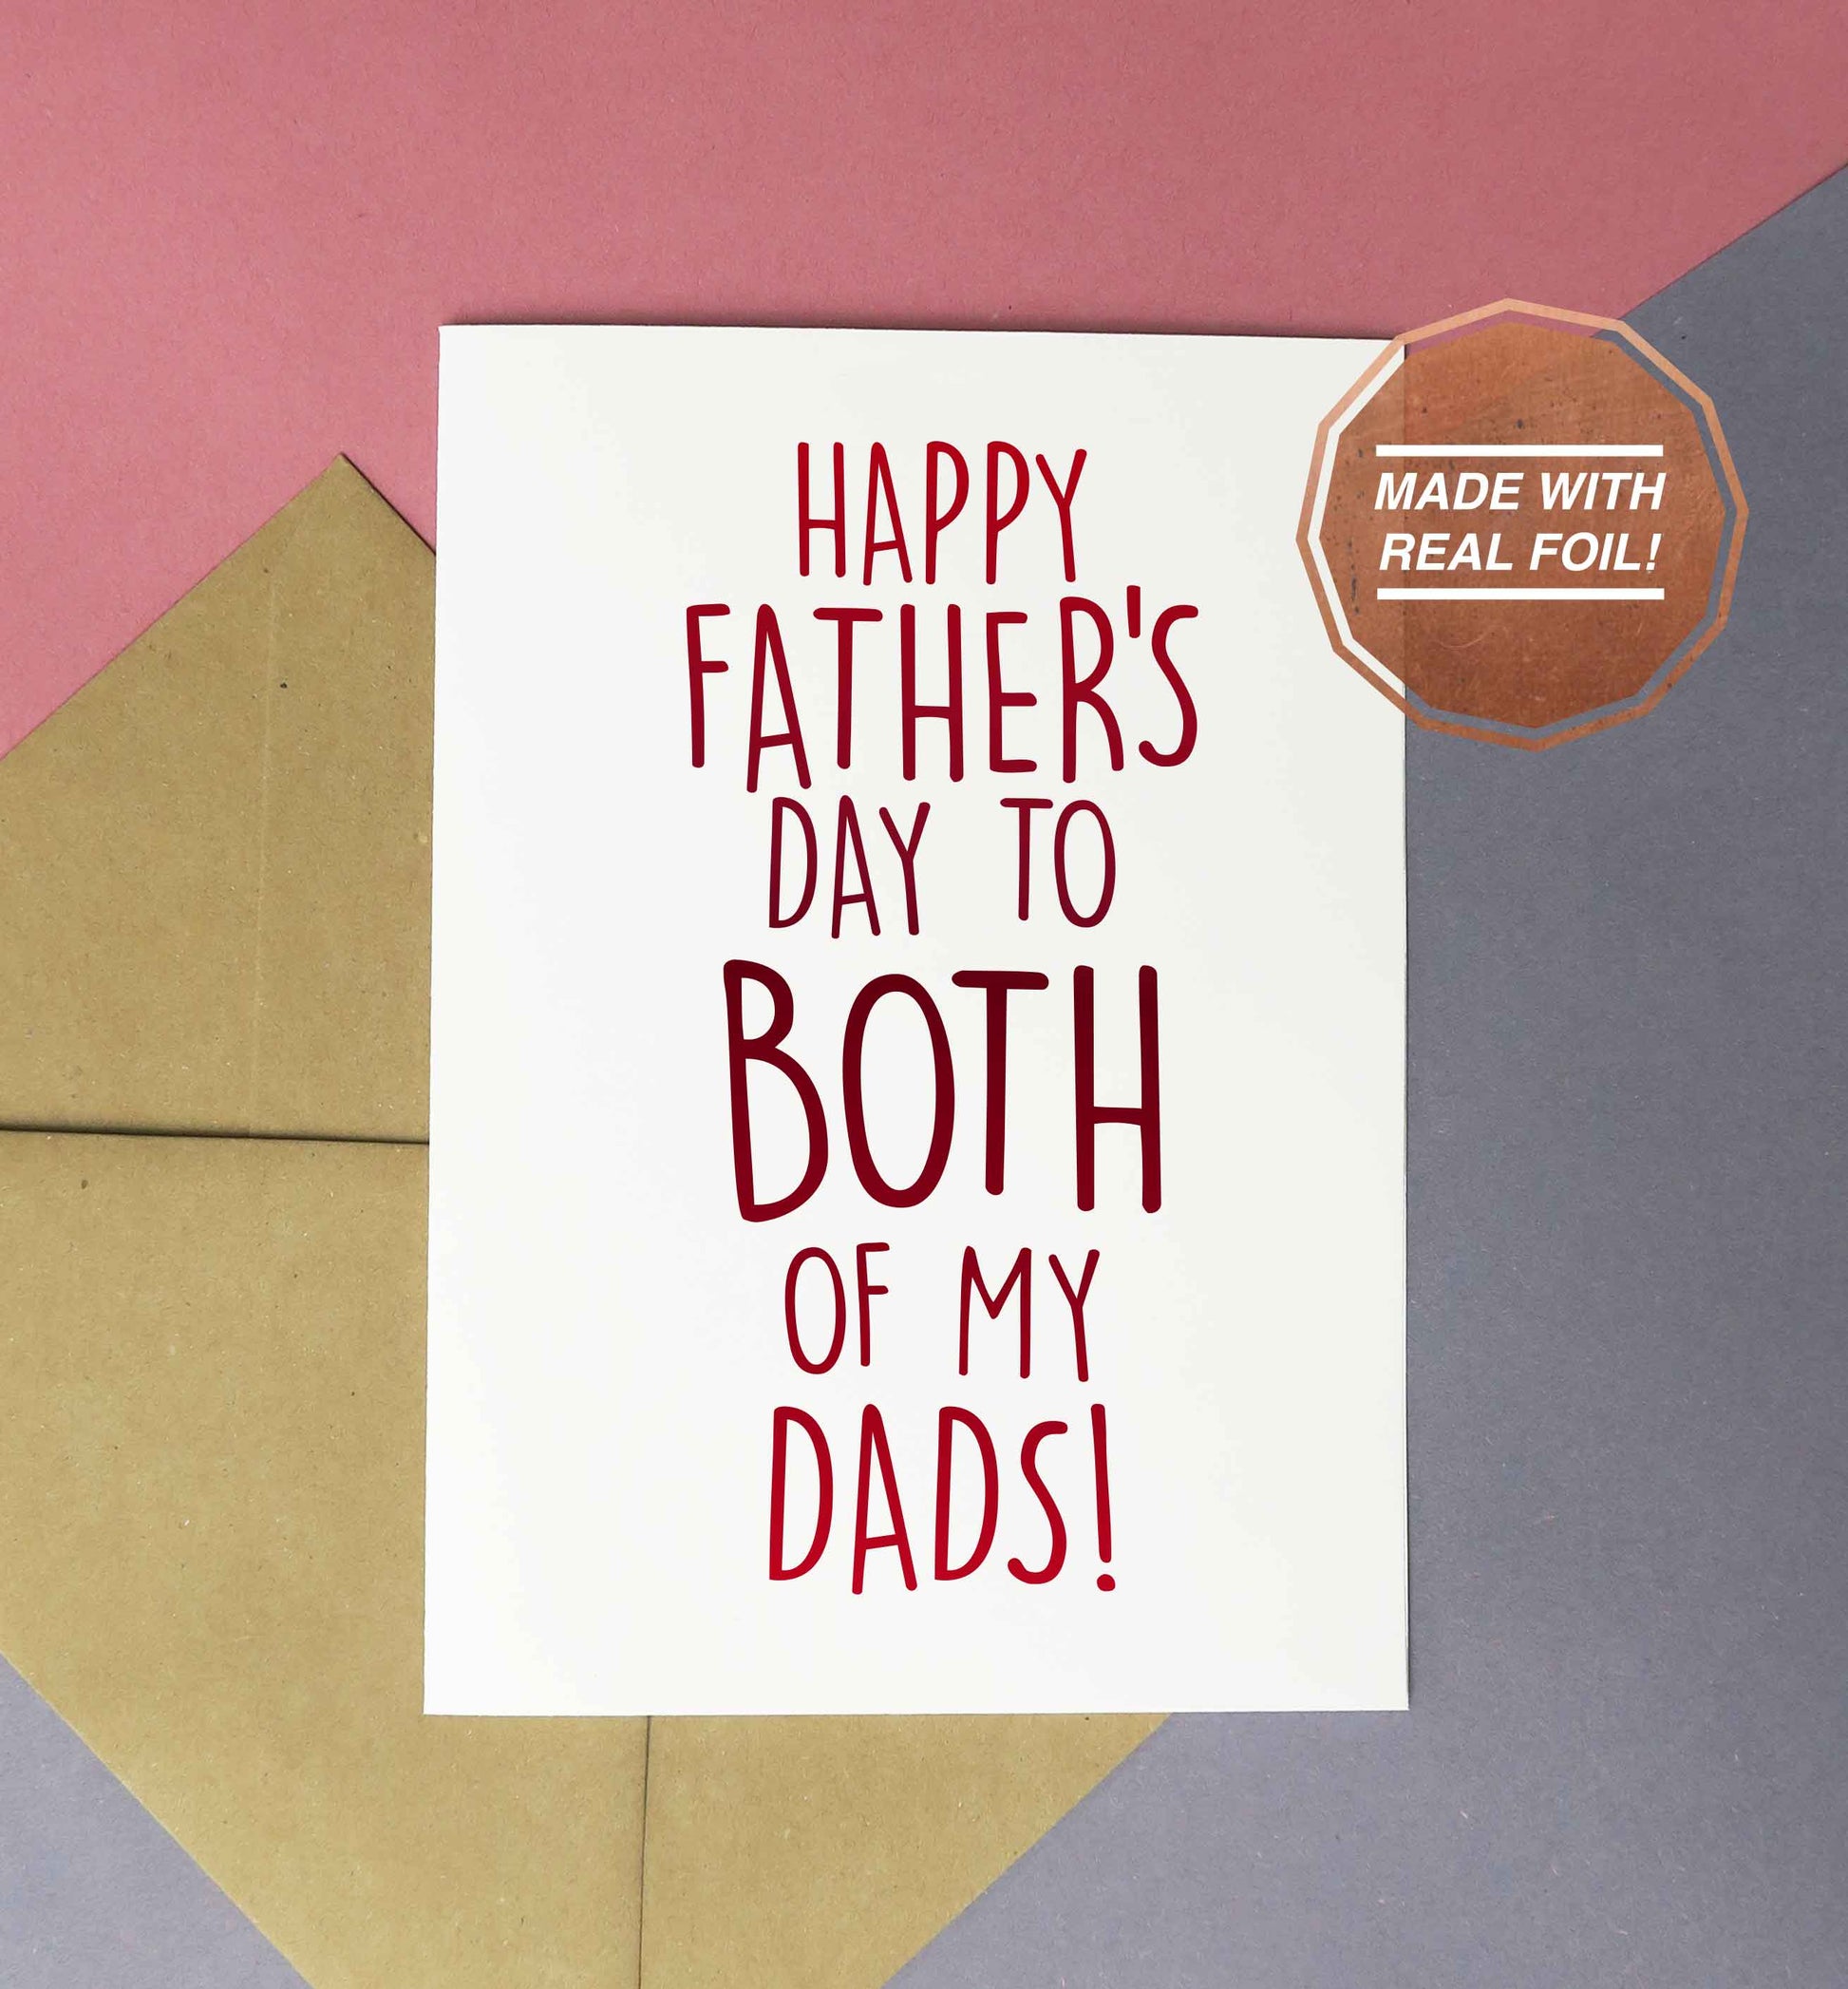 Happy father's day to both of my daddy's foiled handmade card